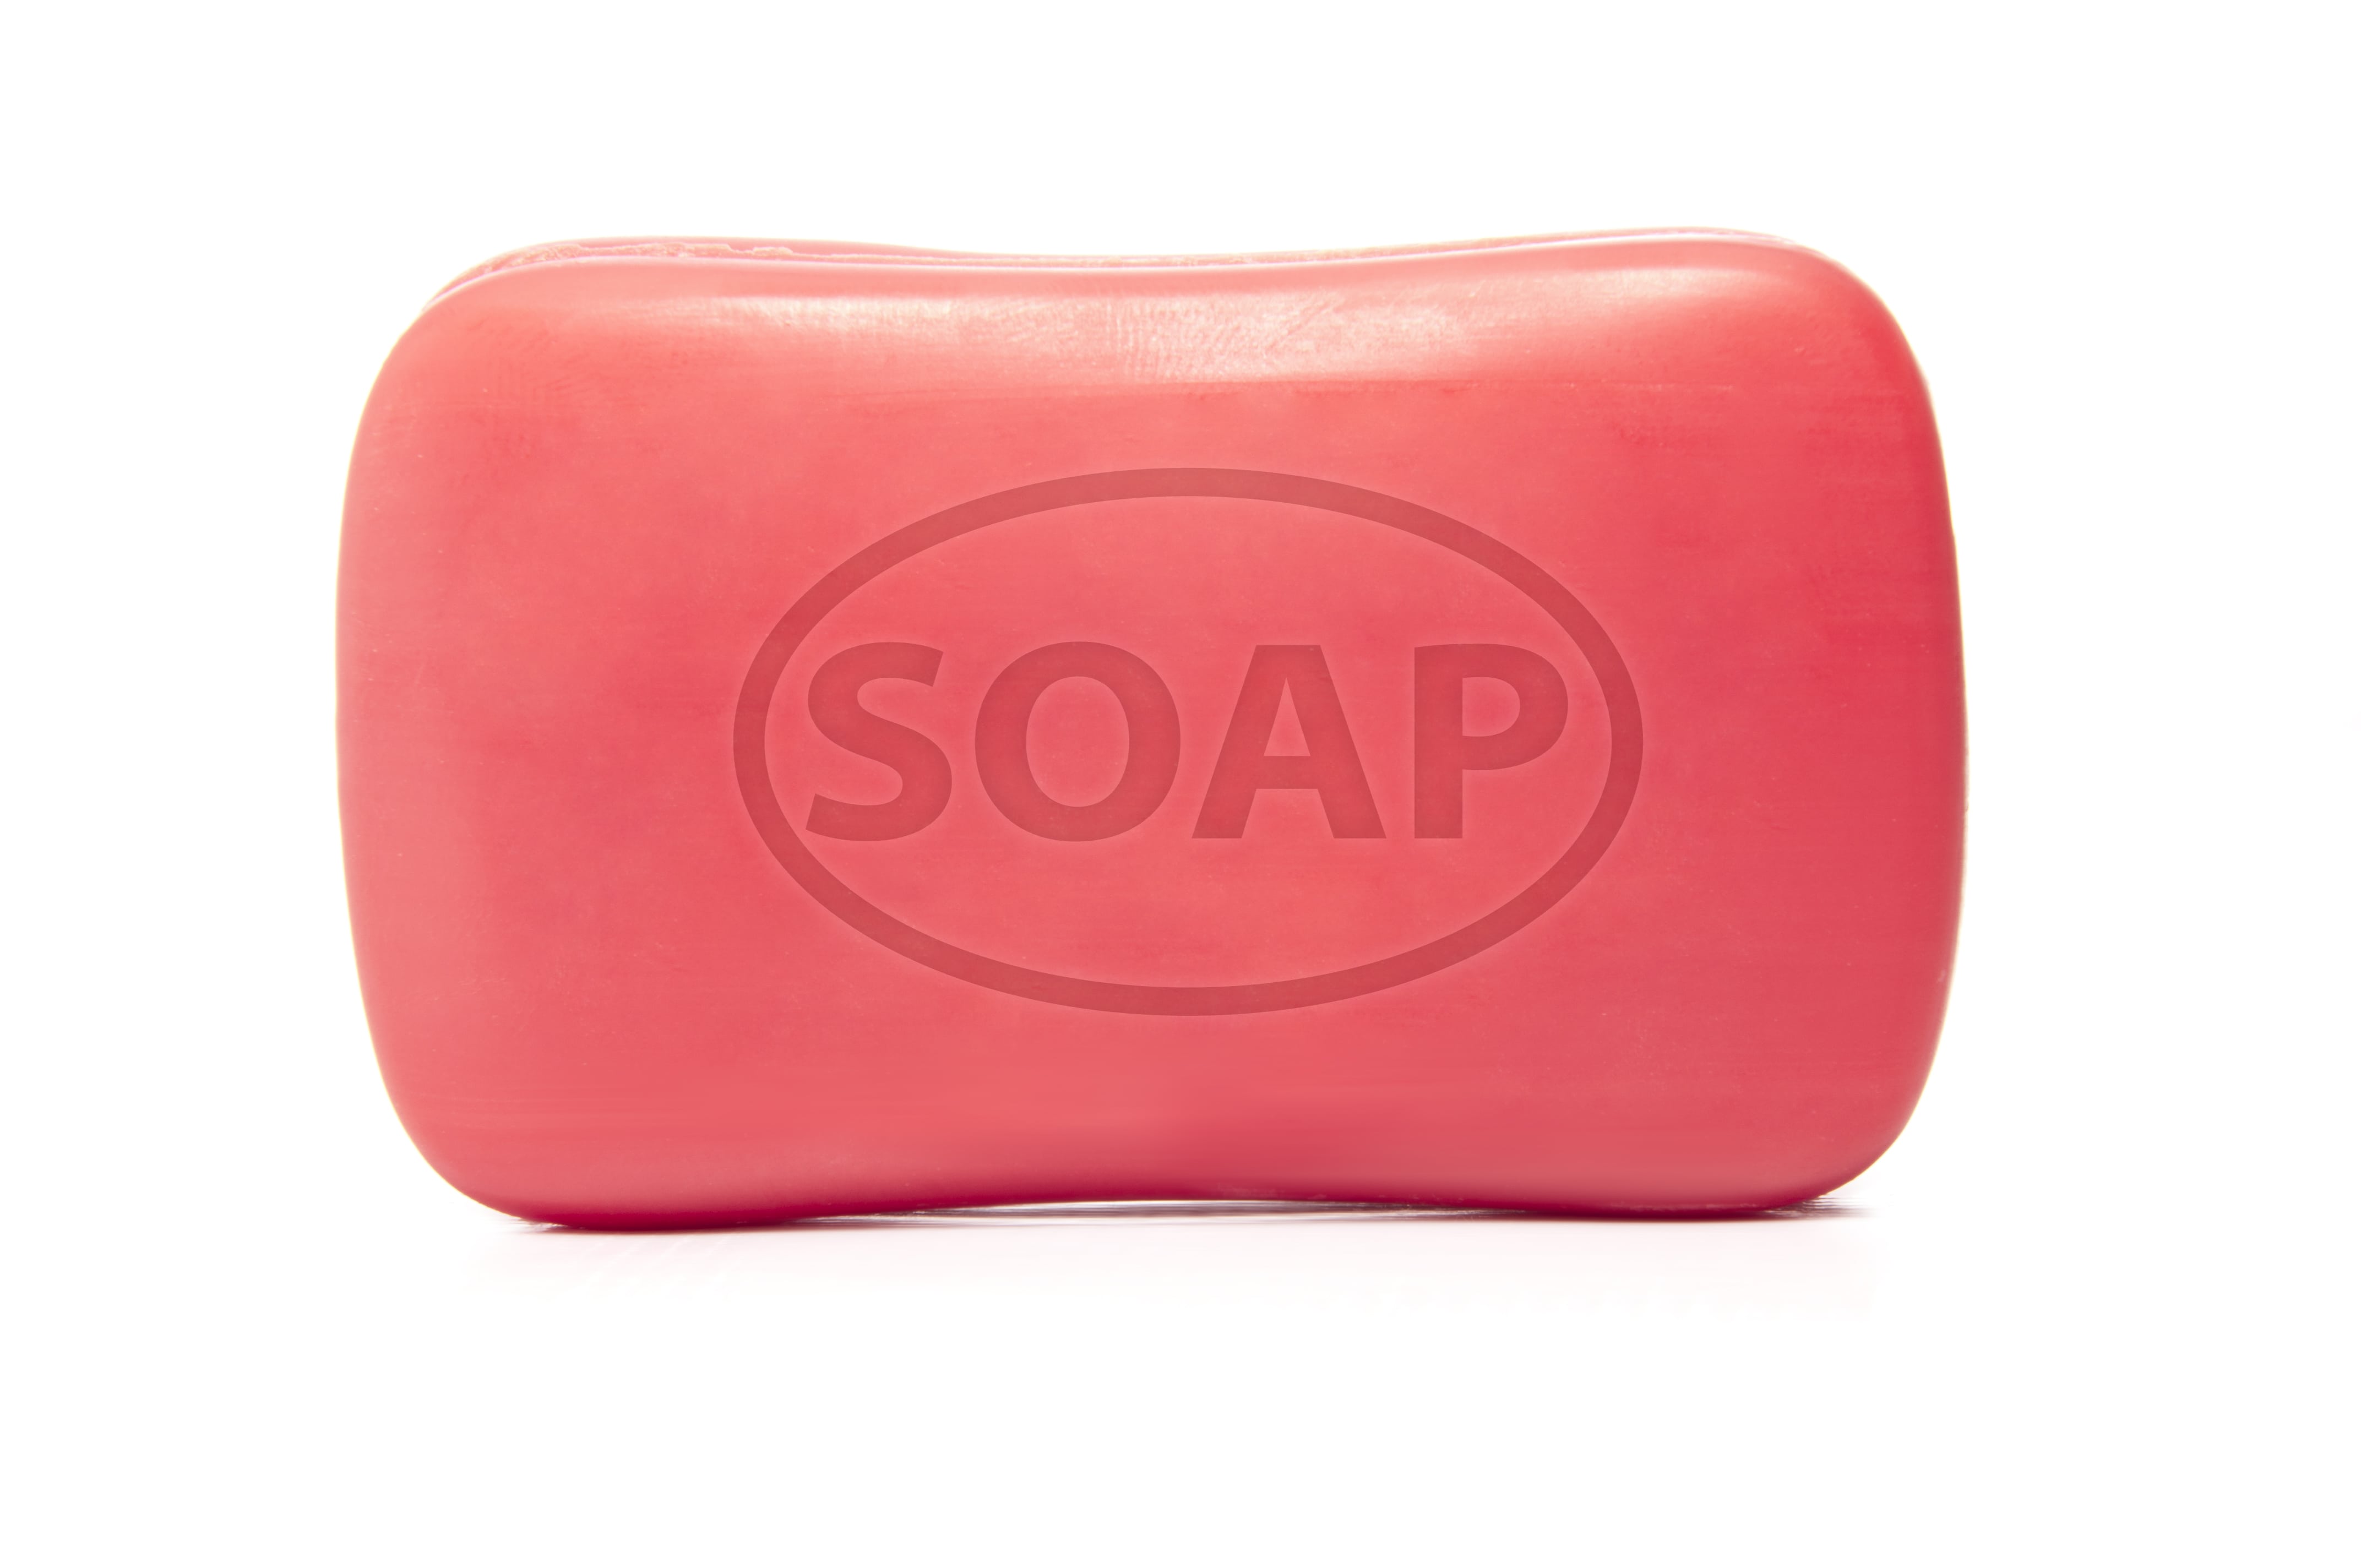 How to Use a Bar of Soap